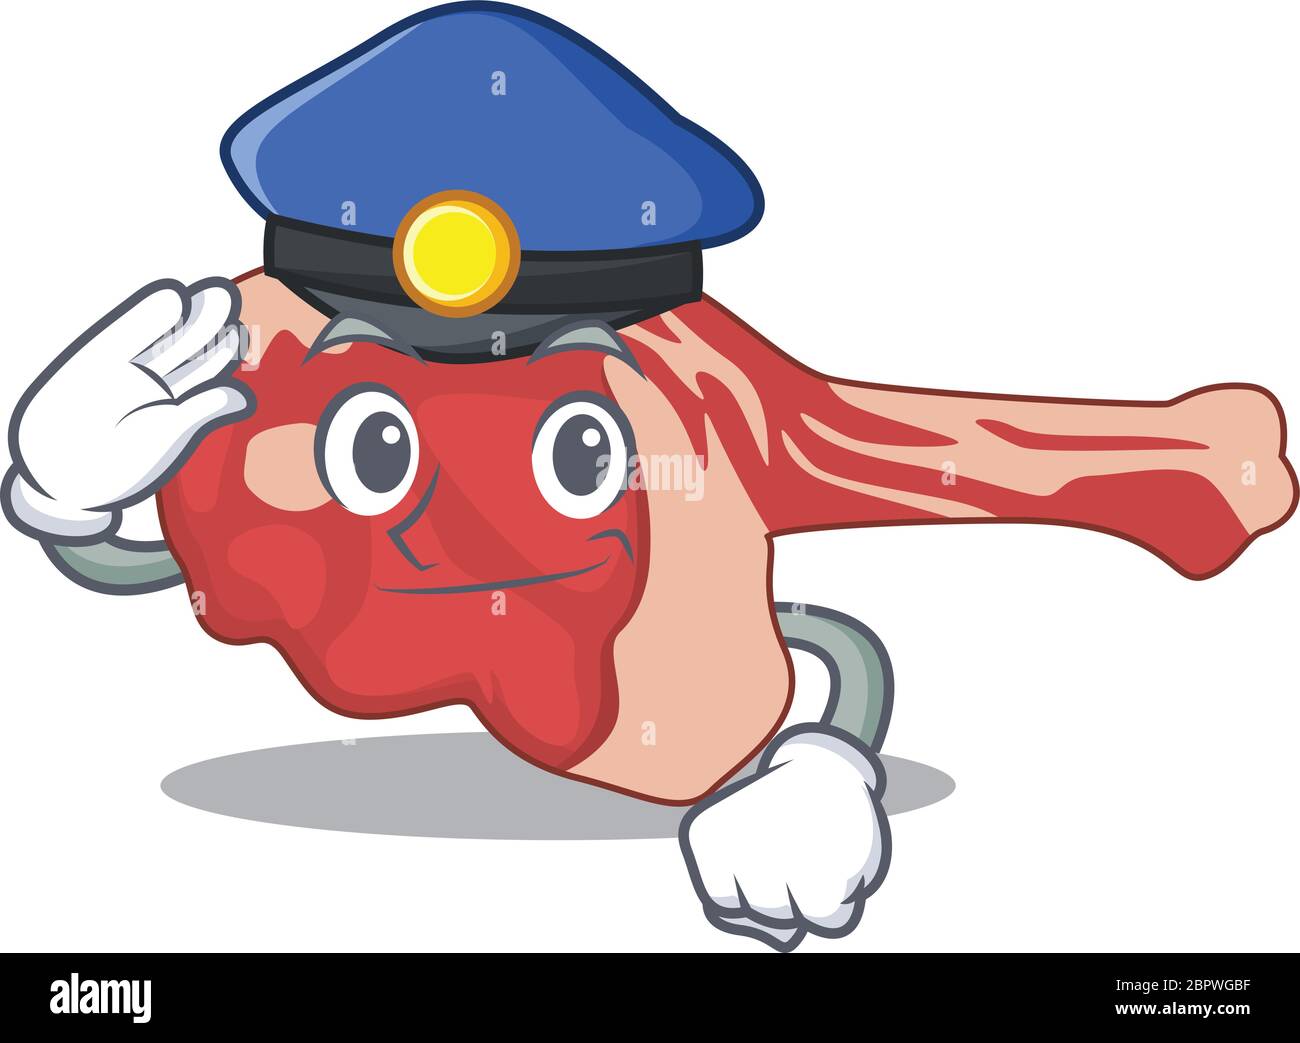 Police officer cartoon drawing of leg of lamb wearing a blue hat Stock Vector